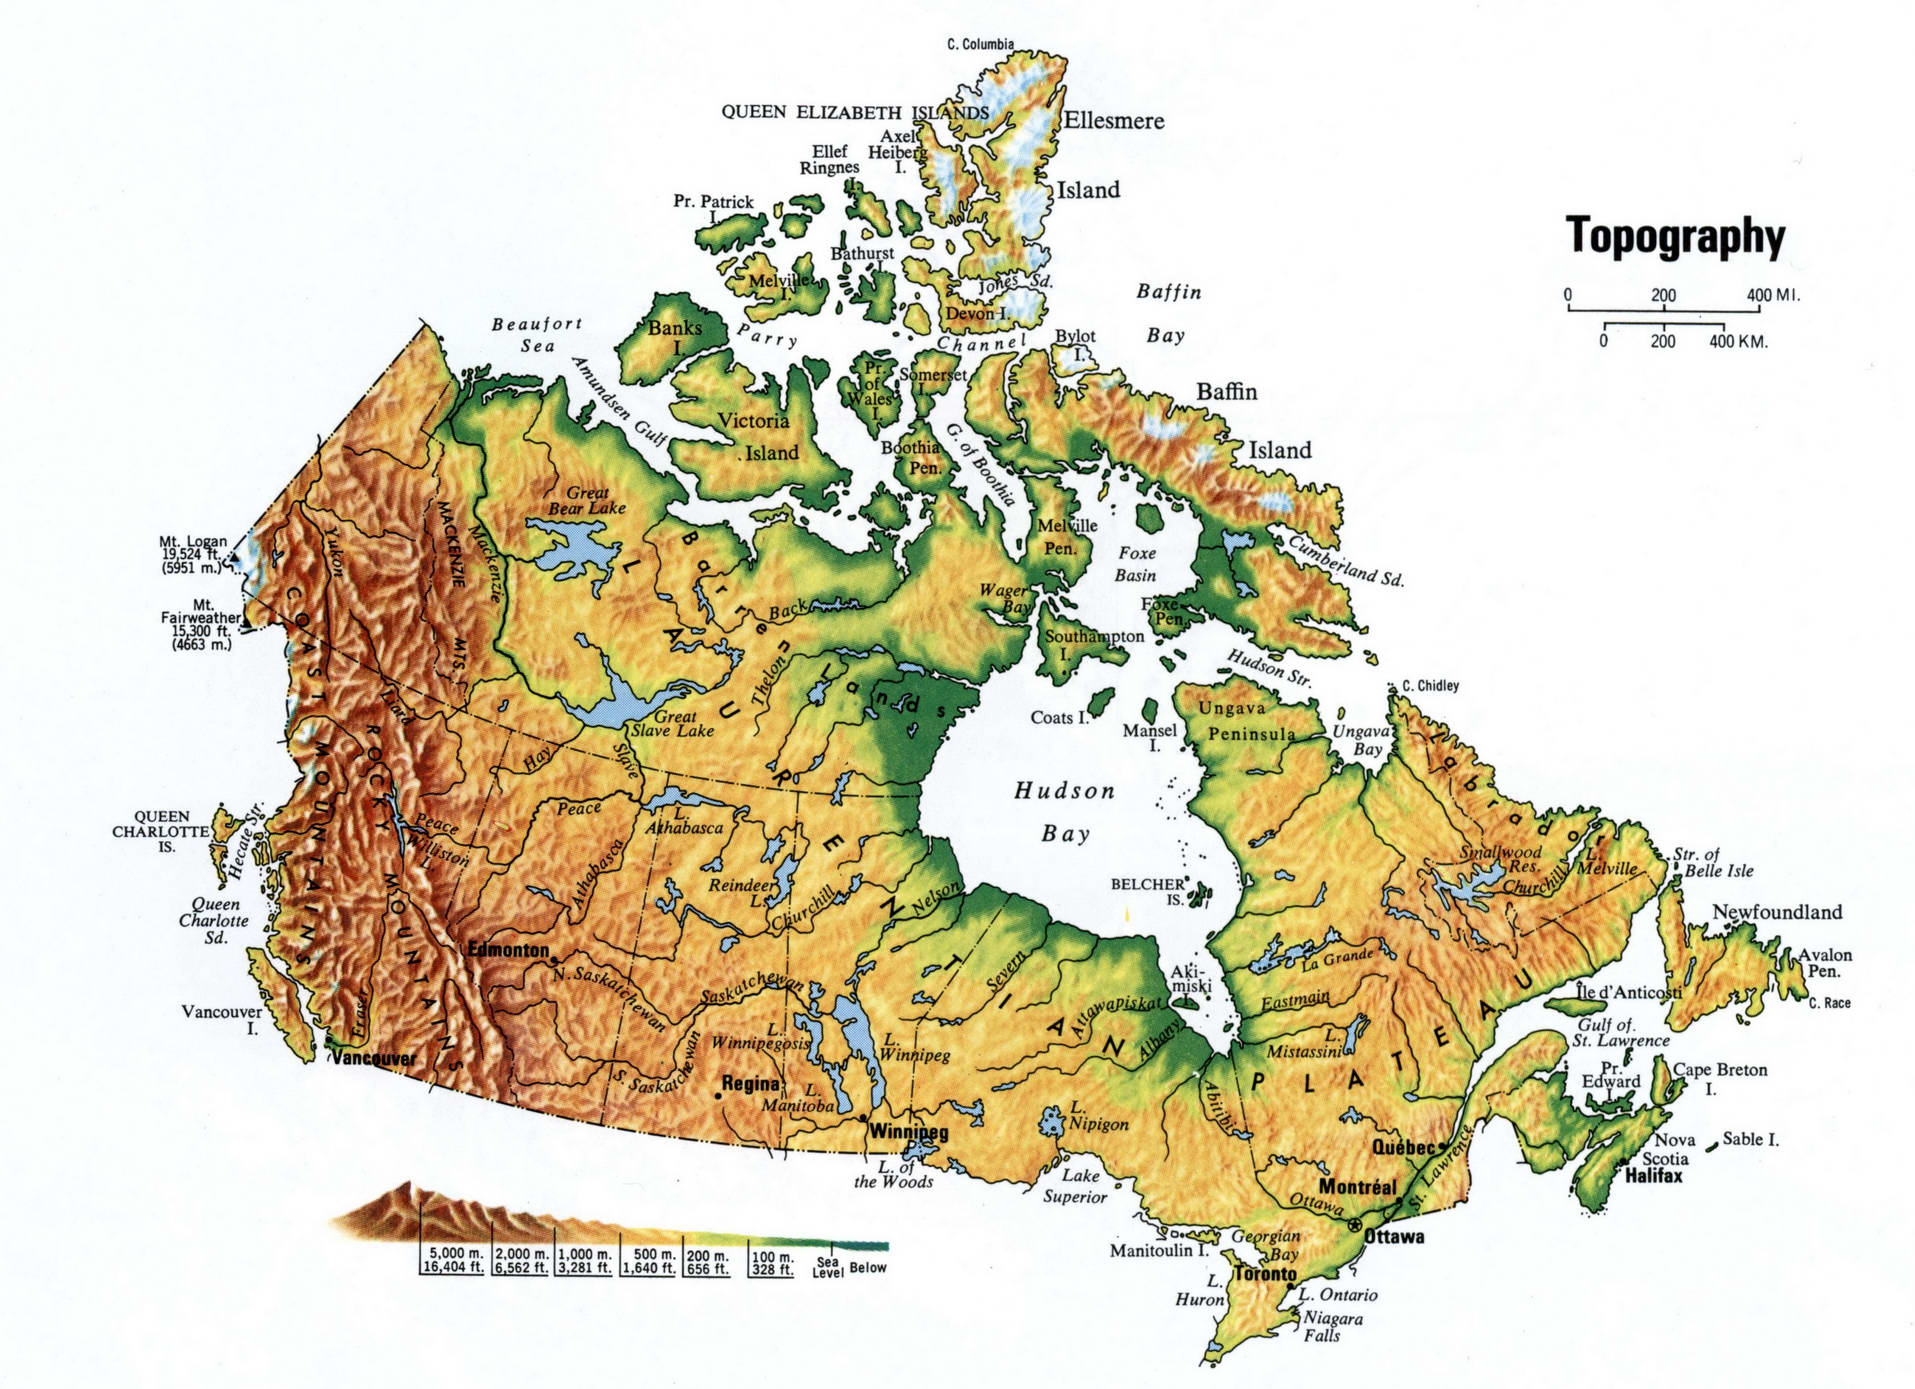 Topographic map of Canada